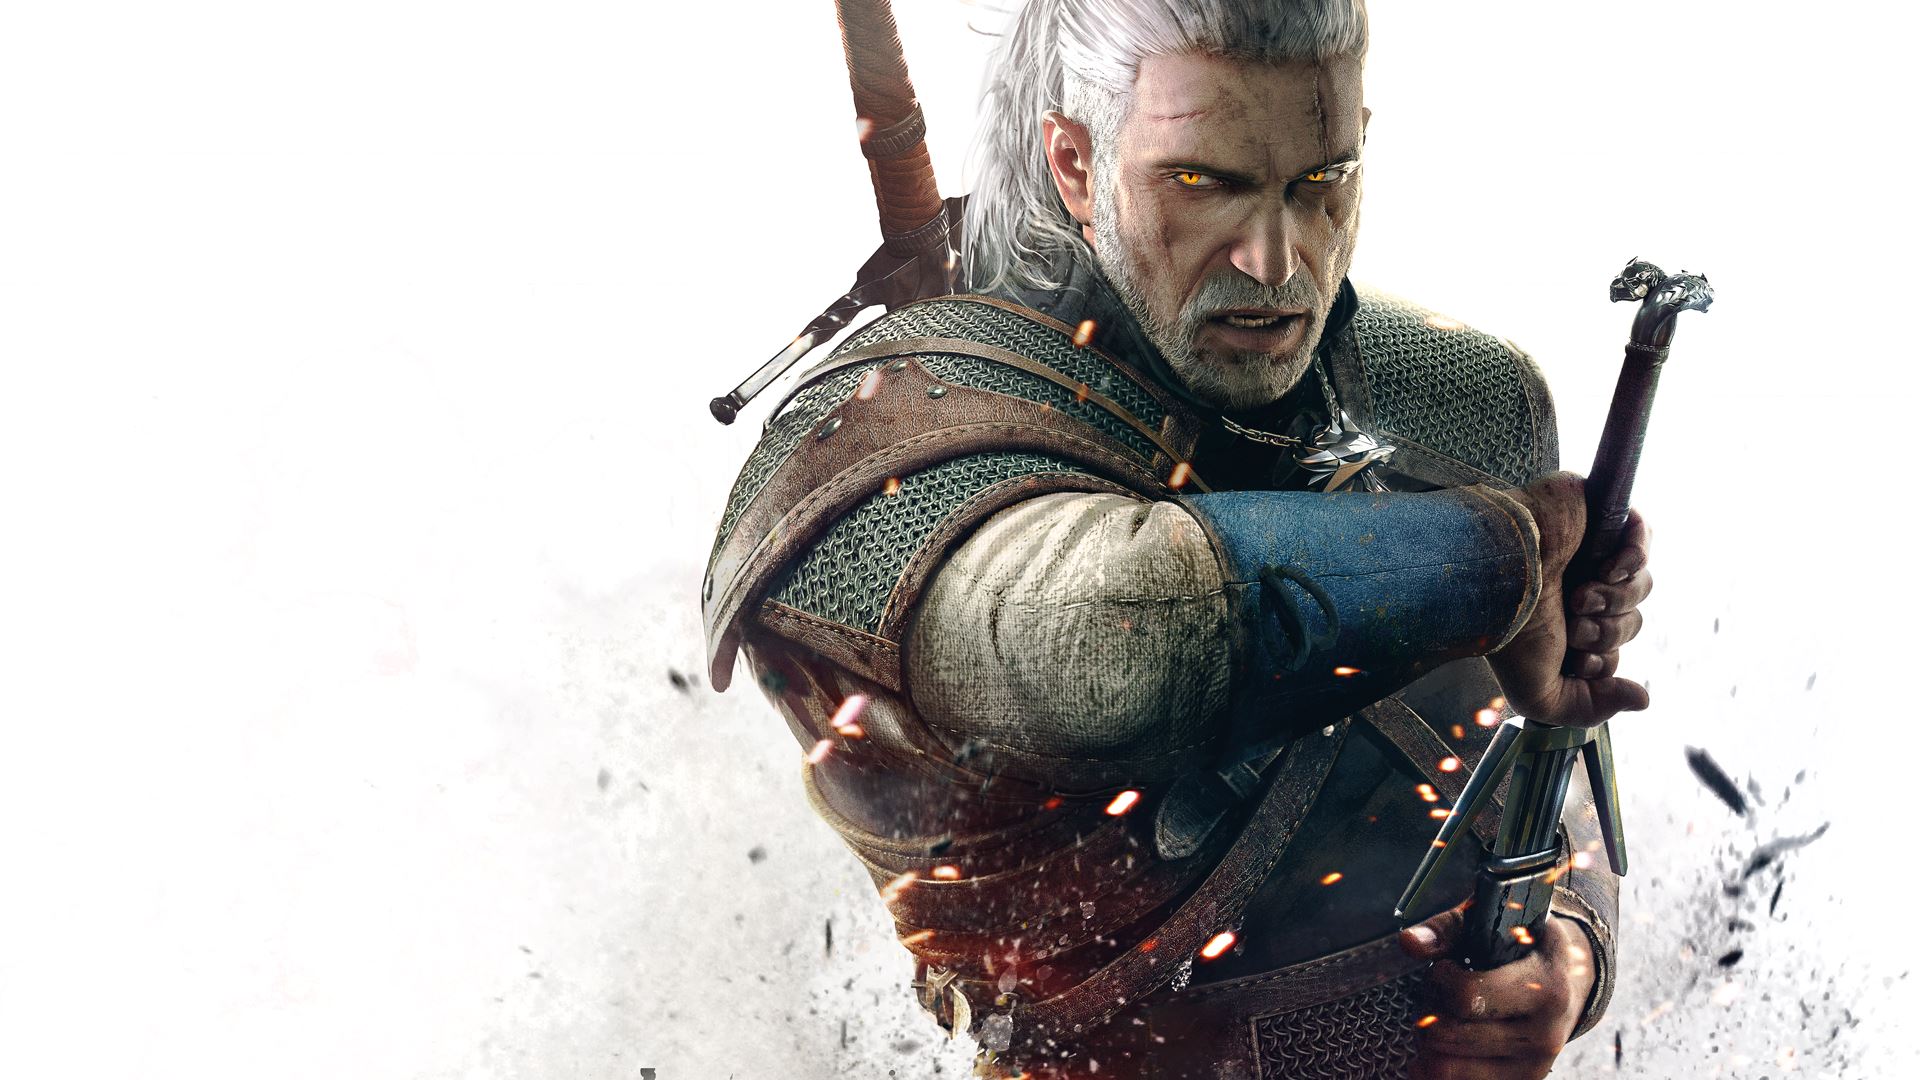 The Witcher 3 Wild Hunt Game Wallpapers HD Wallpapers 1920x1080